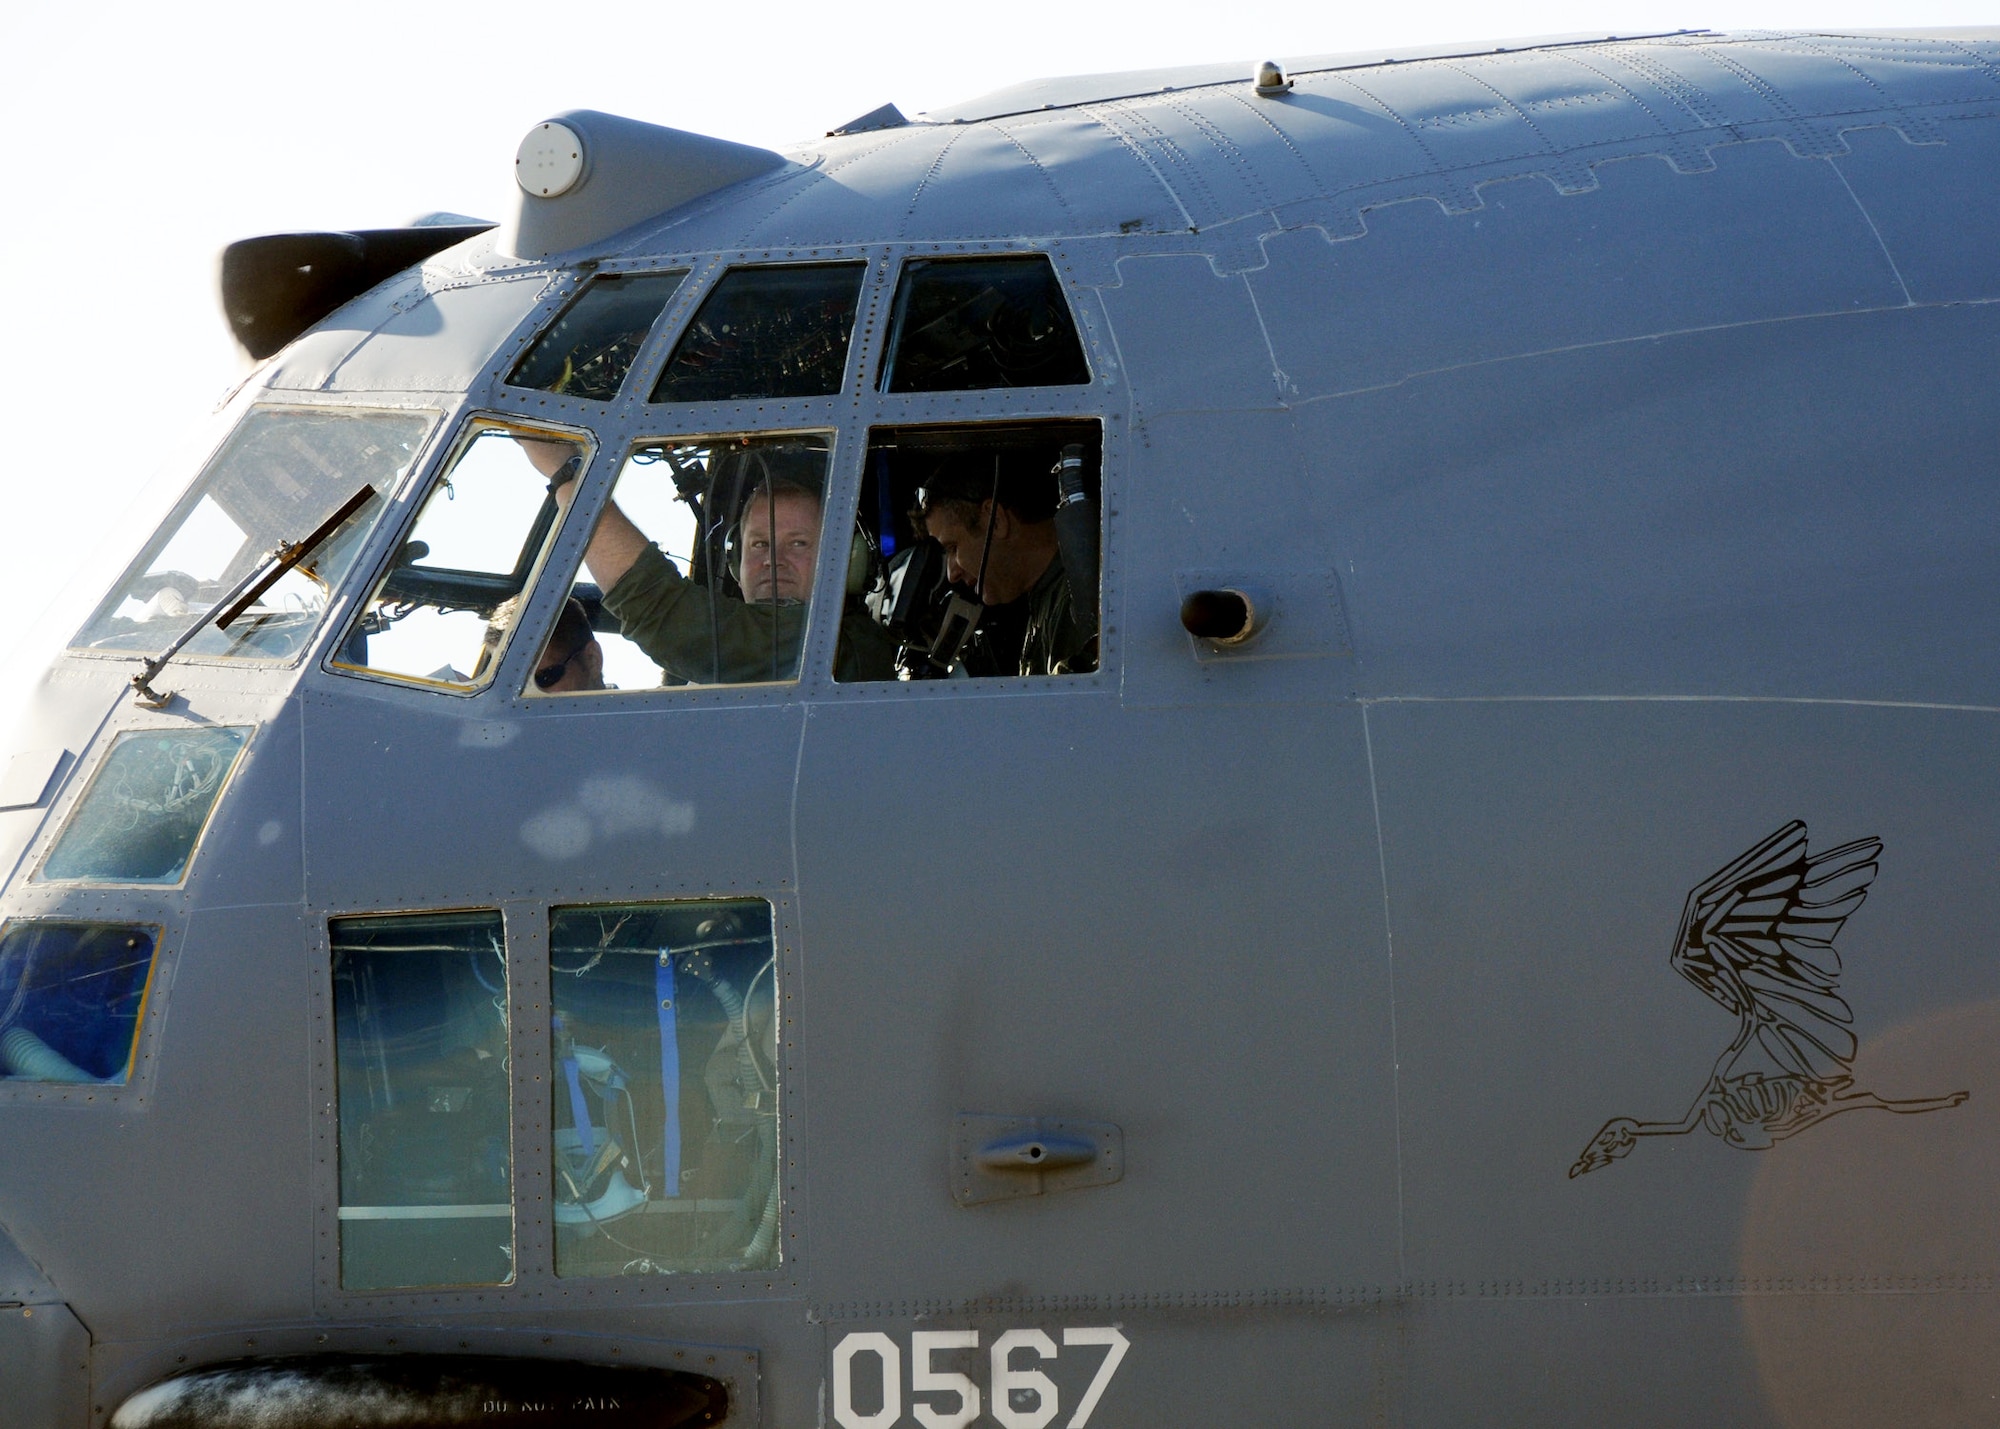 Lt. Col. David Newman, 919th Special Operations Wing pilot, looks out over the Gowen Field flightline while performing flight checks on MC-130E Combat Talon #567 prior to its final departure May 7.  919th aircrew members came up to bring 567 back to its final resting place – the Air Force Special Operations Command airpark at Hurlburt Field, Fla.  Of the flight, the colonel said, “It was a bittersweet flight.  It was an honor flying the last mission of a MC-130E Combat Talon, but somber starting the process that signals the end of the most capable all weather infiltration/exfiltration airframe in AFSOC's inventory.”  919th maintainers were also sent to Gowen Field to prepare four Talons to take off for one more mission – a flight into retirement and decommissioning.  Three of the Talons flew to Davis-Monthan Air Force Base, Ariz.  (U.S. Air Force photo/Tech. Sgt. Samuel King Jr.)